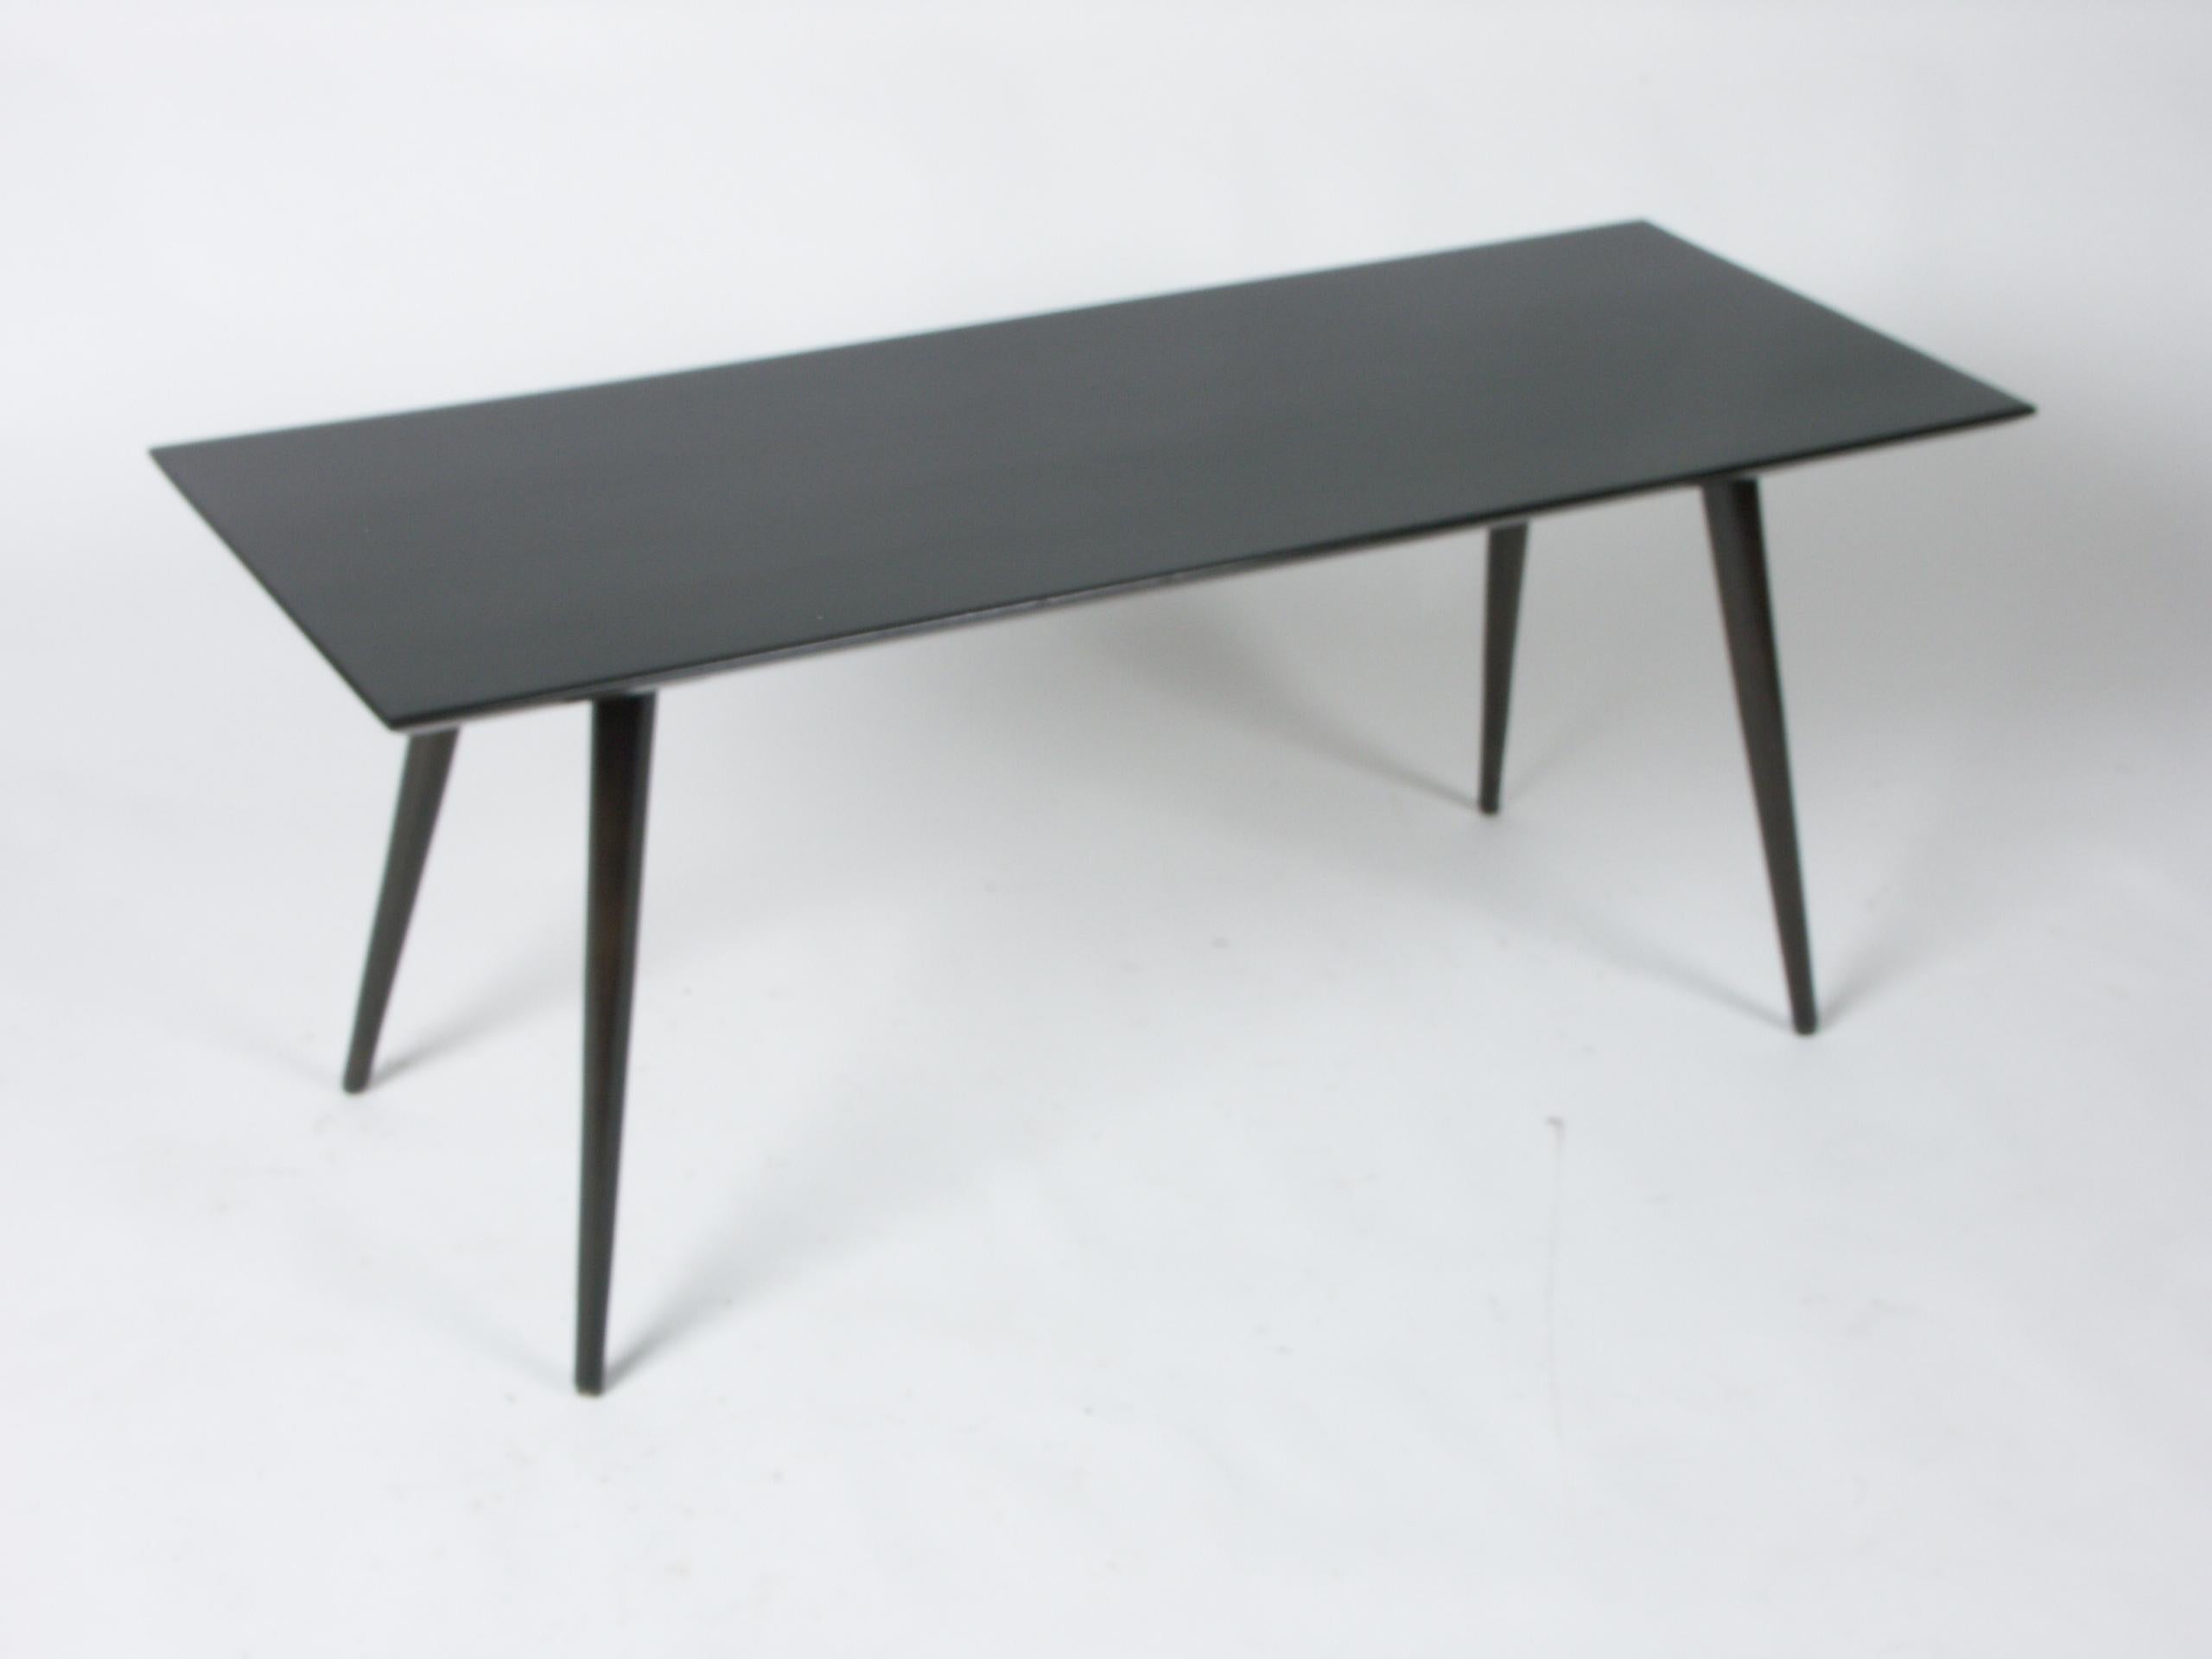 Stained Mid-Century Modern McCobb Planner Group Coffee Table in a Dark Finish on Birch